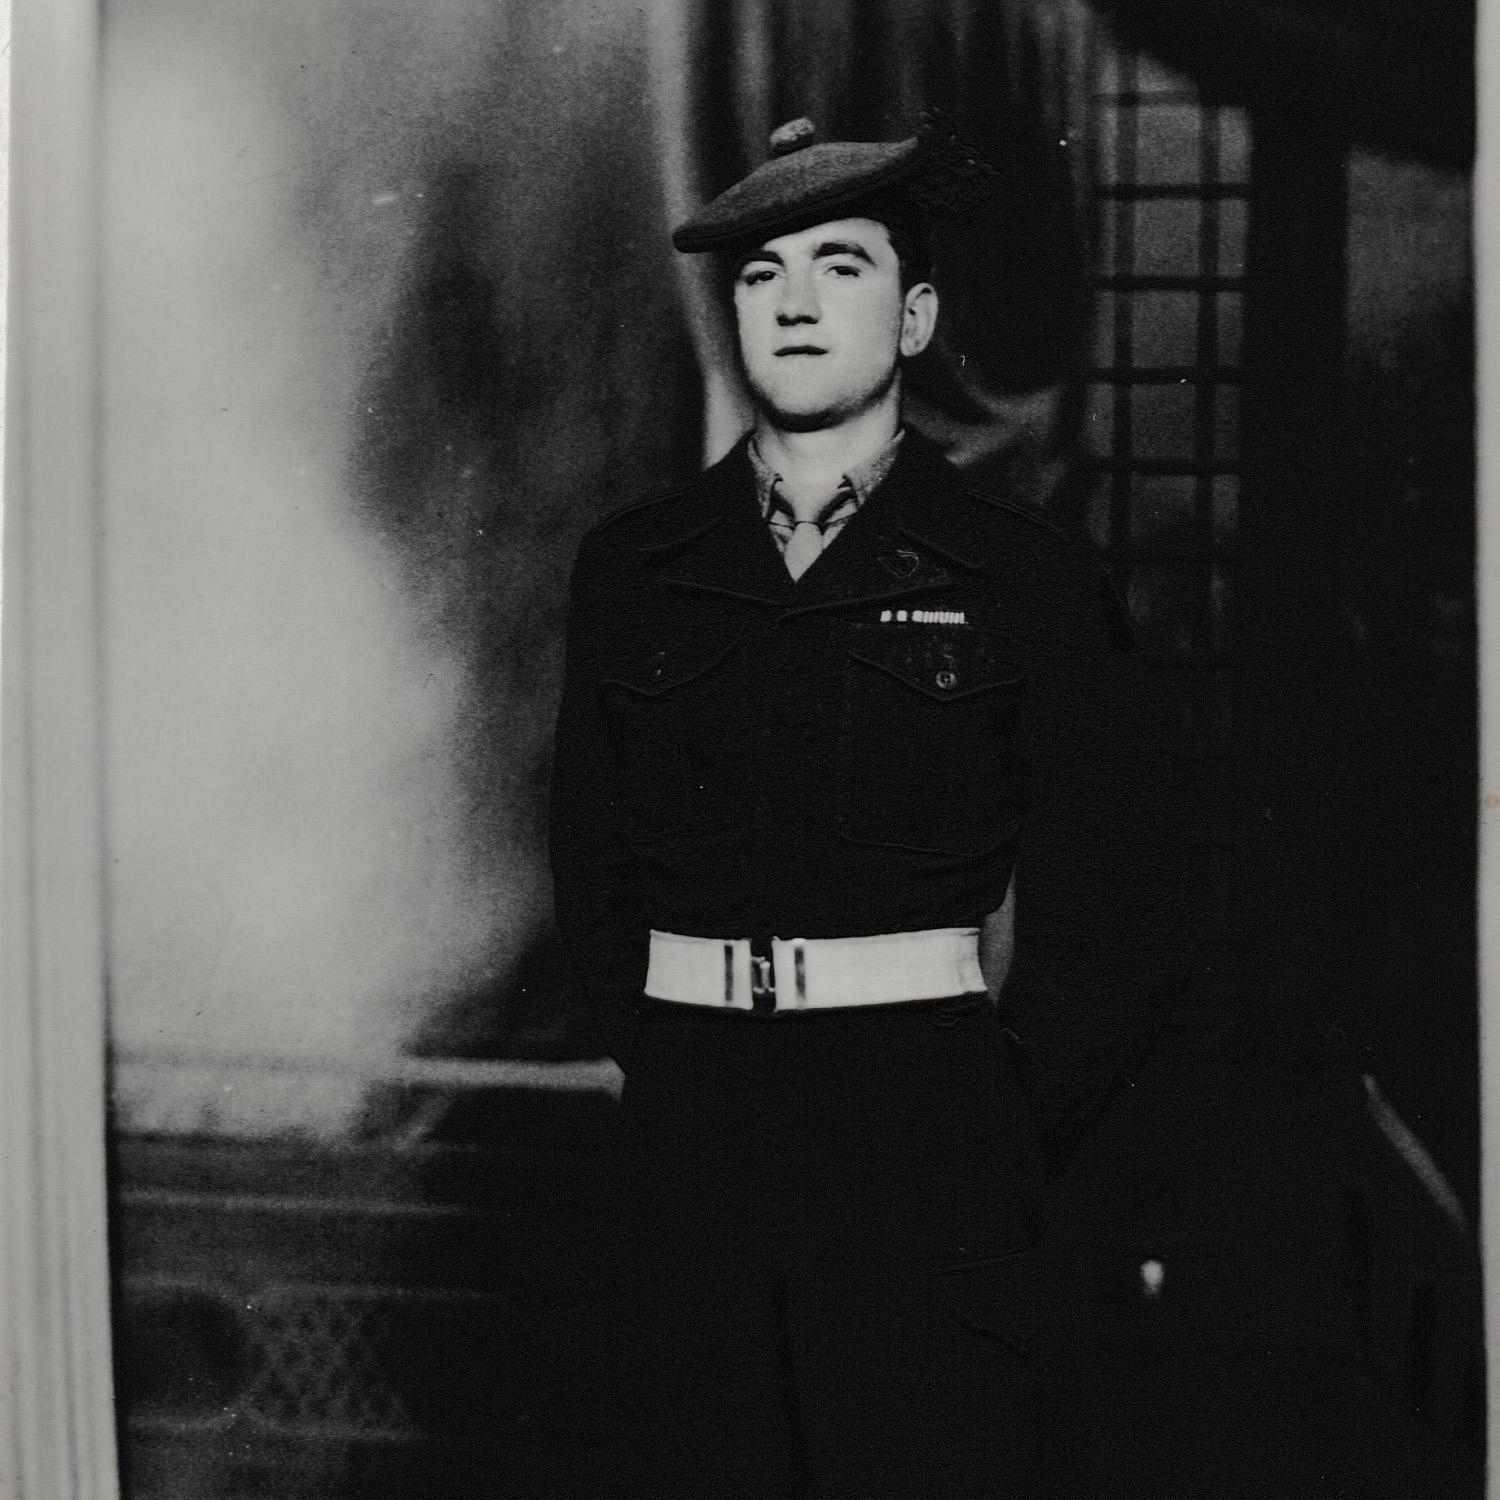 Young Andrew Glassford in uniform